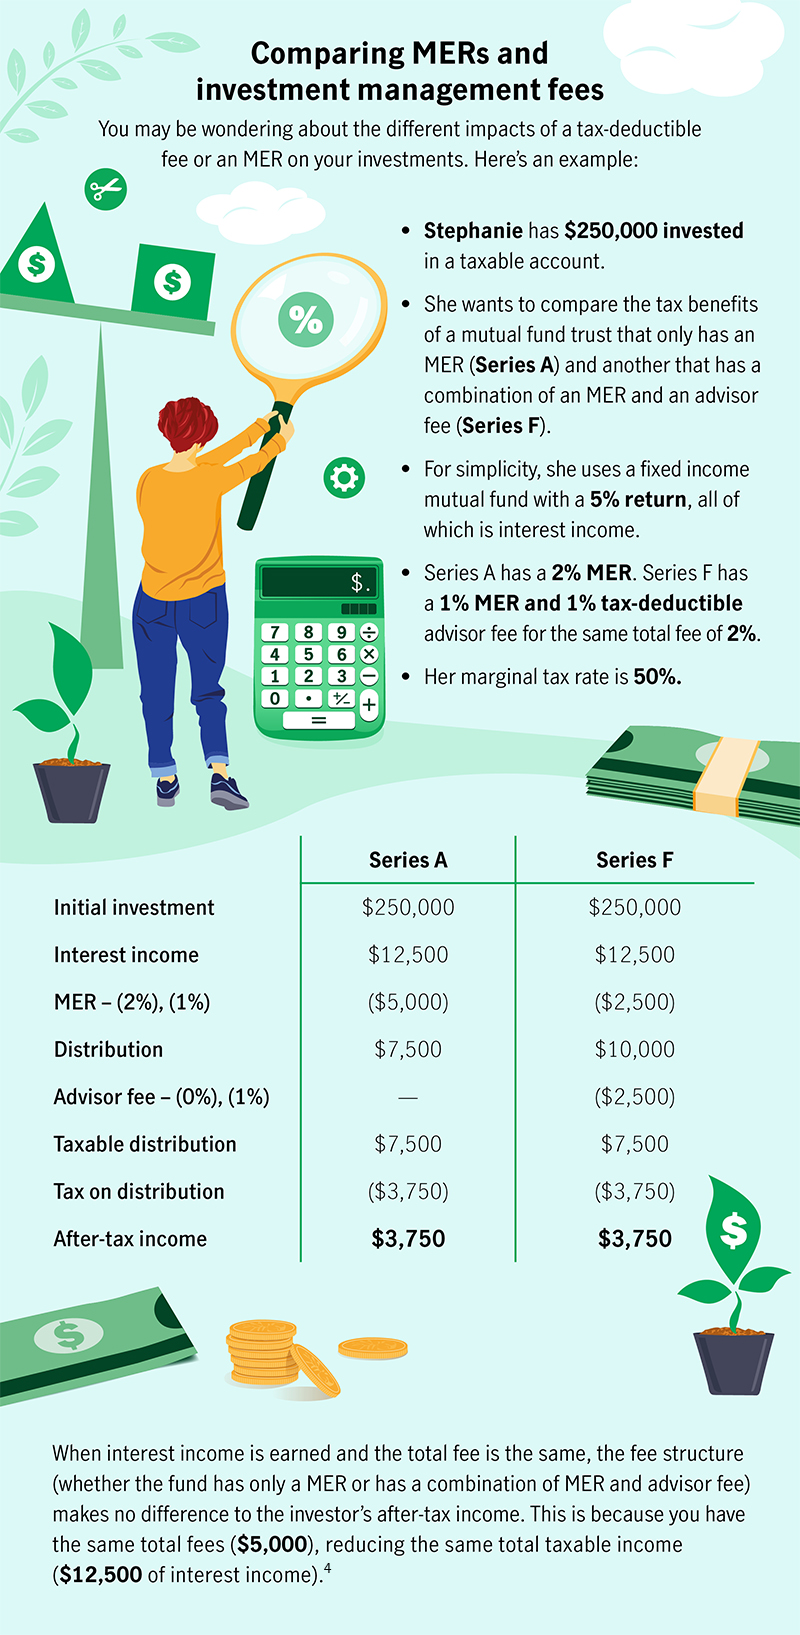 This infographic shows an example that compares investment management fees and MERs. The example includes a table that breaks down the differences between a Series A and Series F mutual fund.  When interest income is earned and the total fee is the same, the fee structure (whether the fund has only a MER or has a combination of MER and advisor fee) makes no difference to the investor's after-tax income.